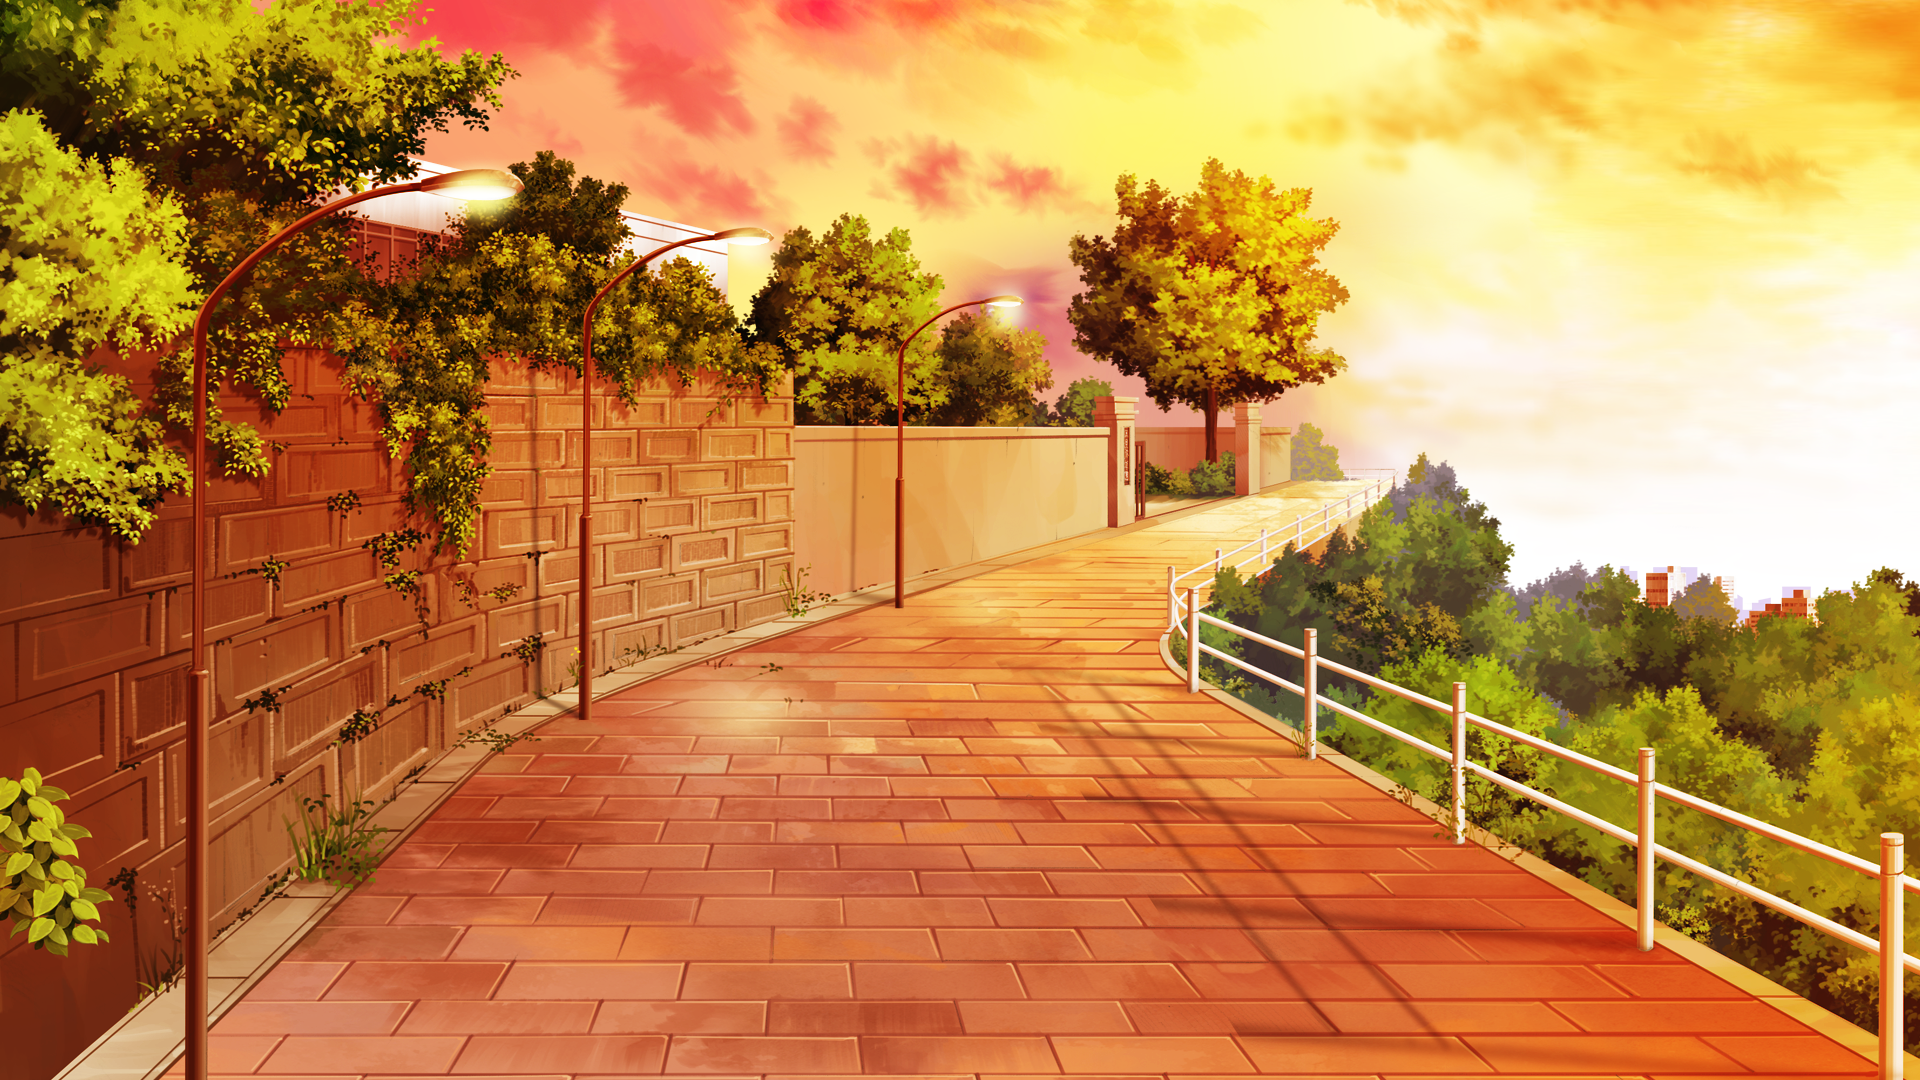 Png Scenery Backgrounds & Free Scenery Backgrounds.png Transparent.